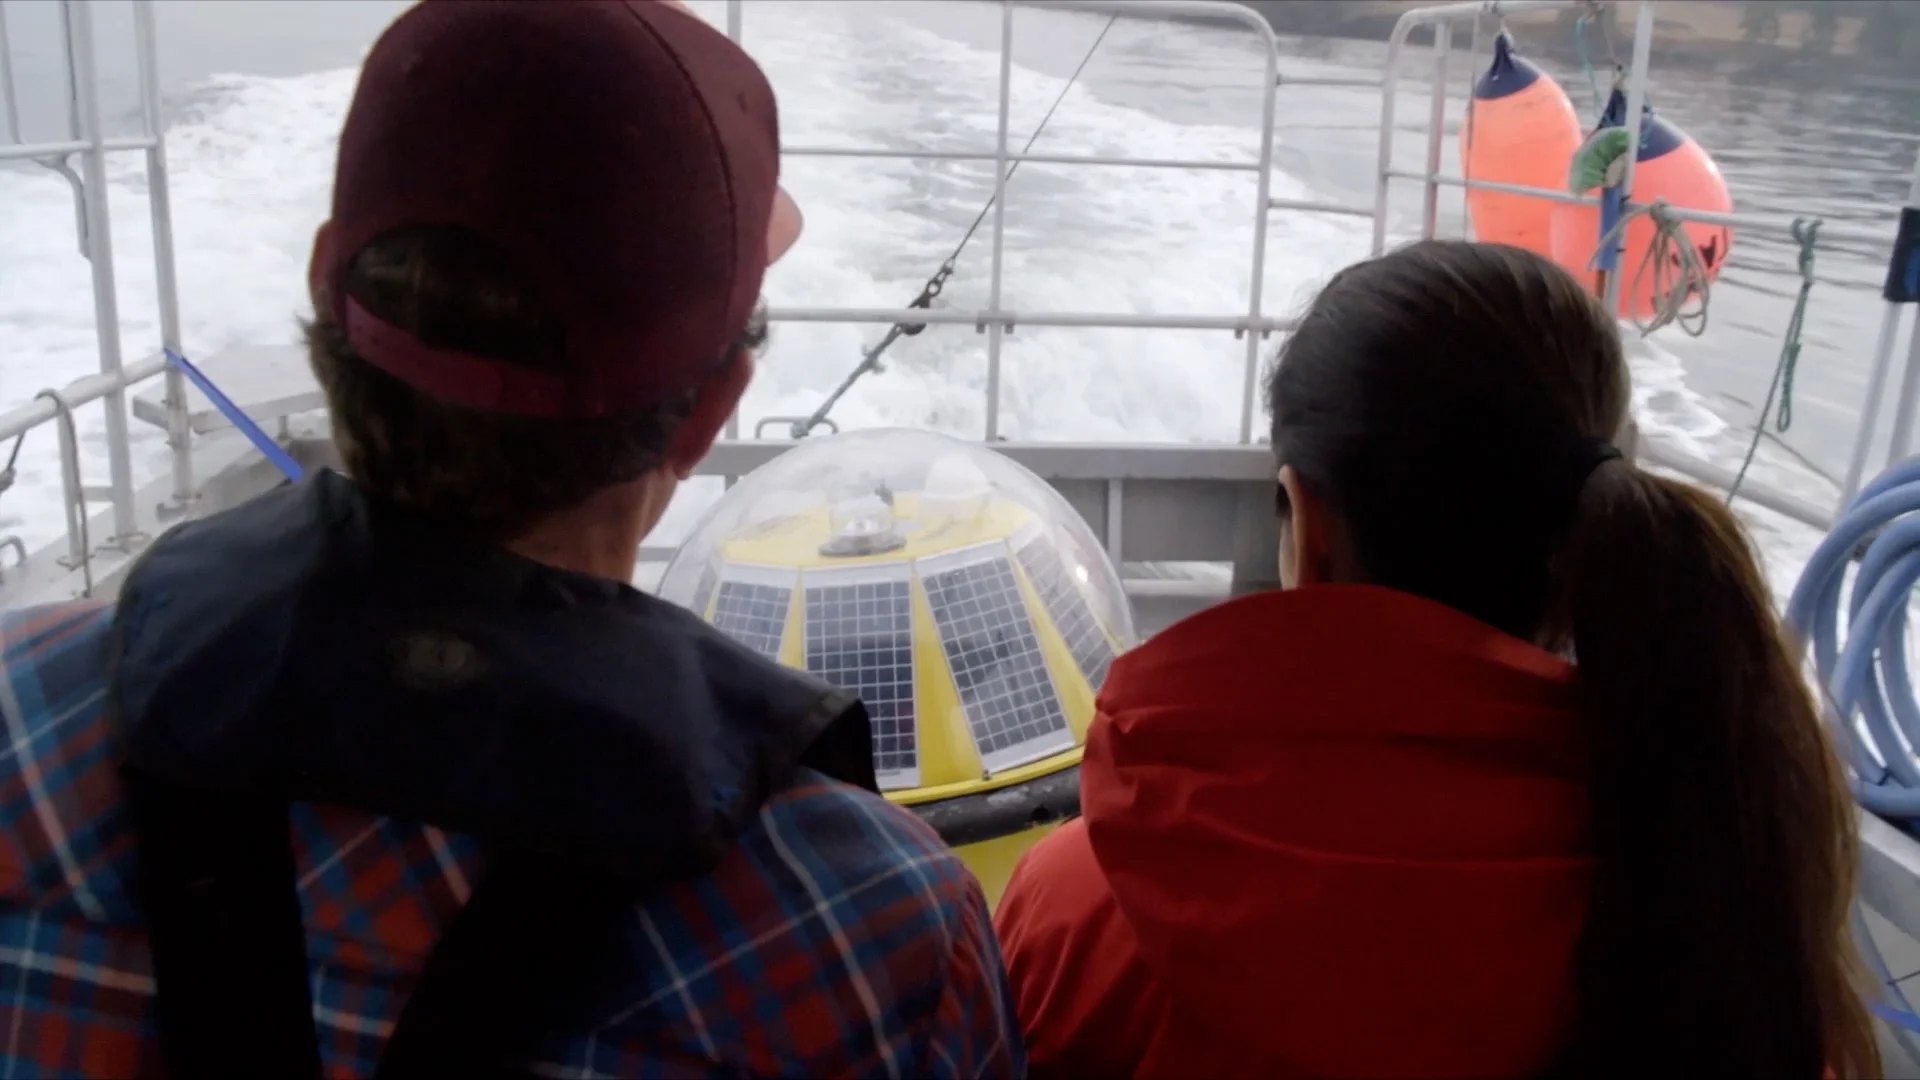 Laboucan-Massimo and Robertson out at sea deploying a research buoy. (Power to the People)